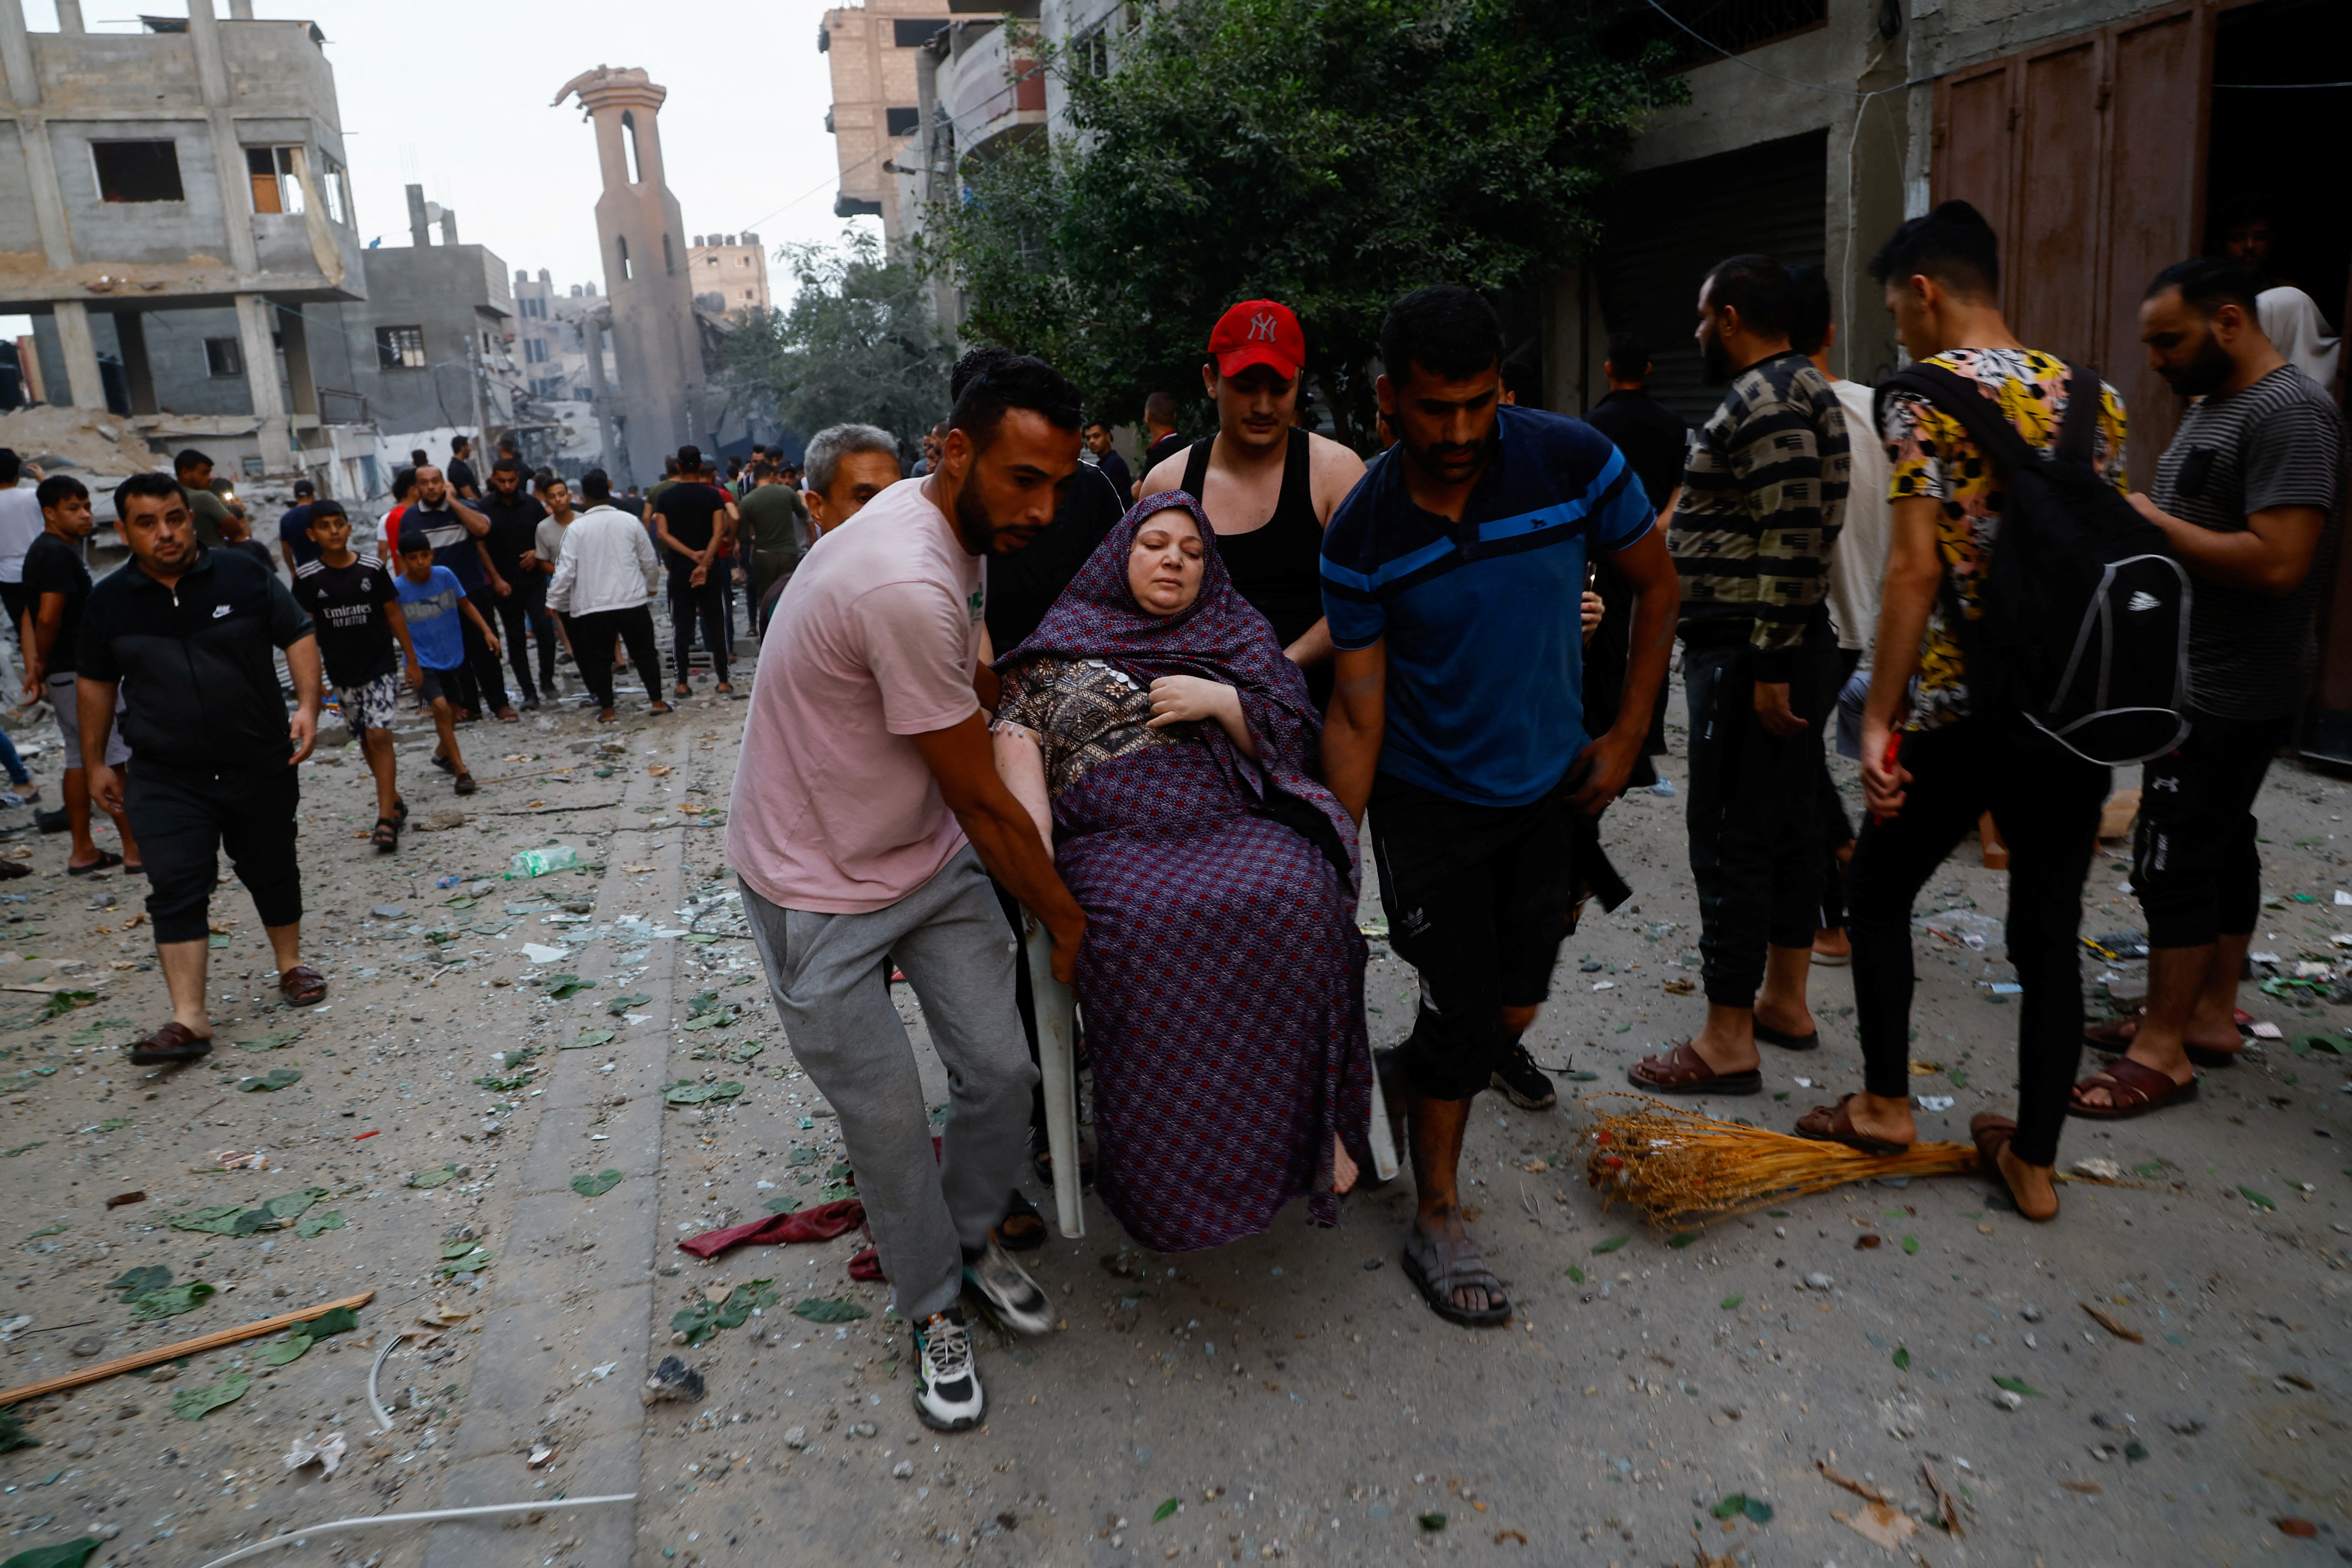 Palestinians carry a woman on a debris-strewn street in the aftermath of Israeli strikes, following a Hamas surprise attack, at Beach refugee camp, in Gaza City